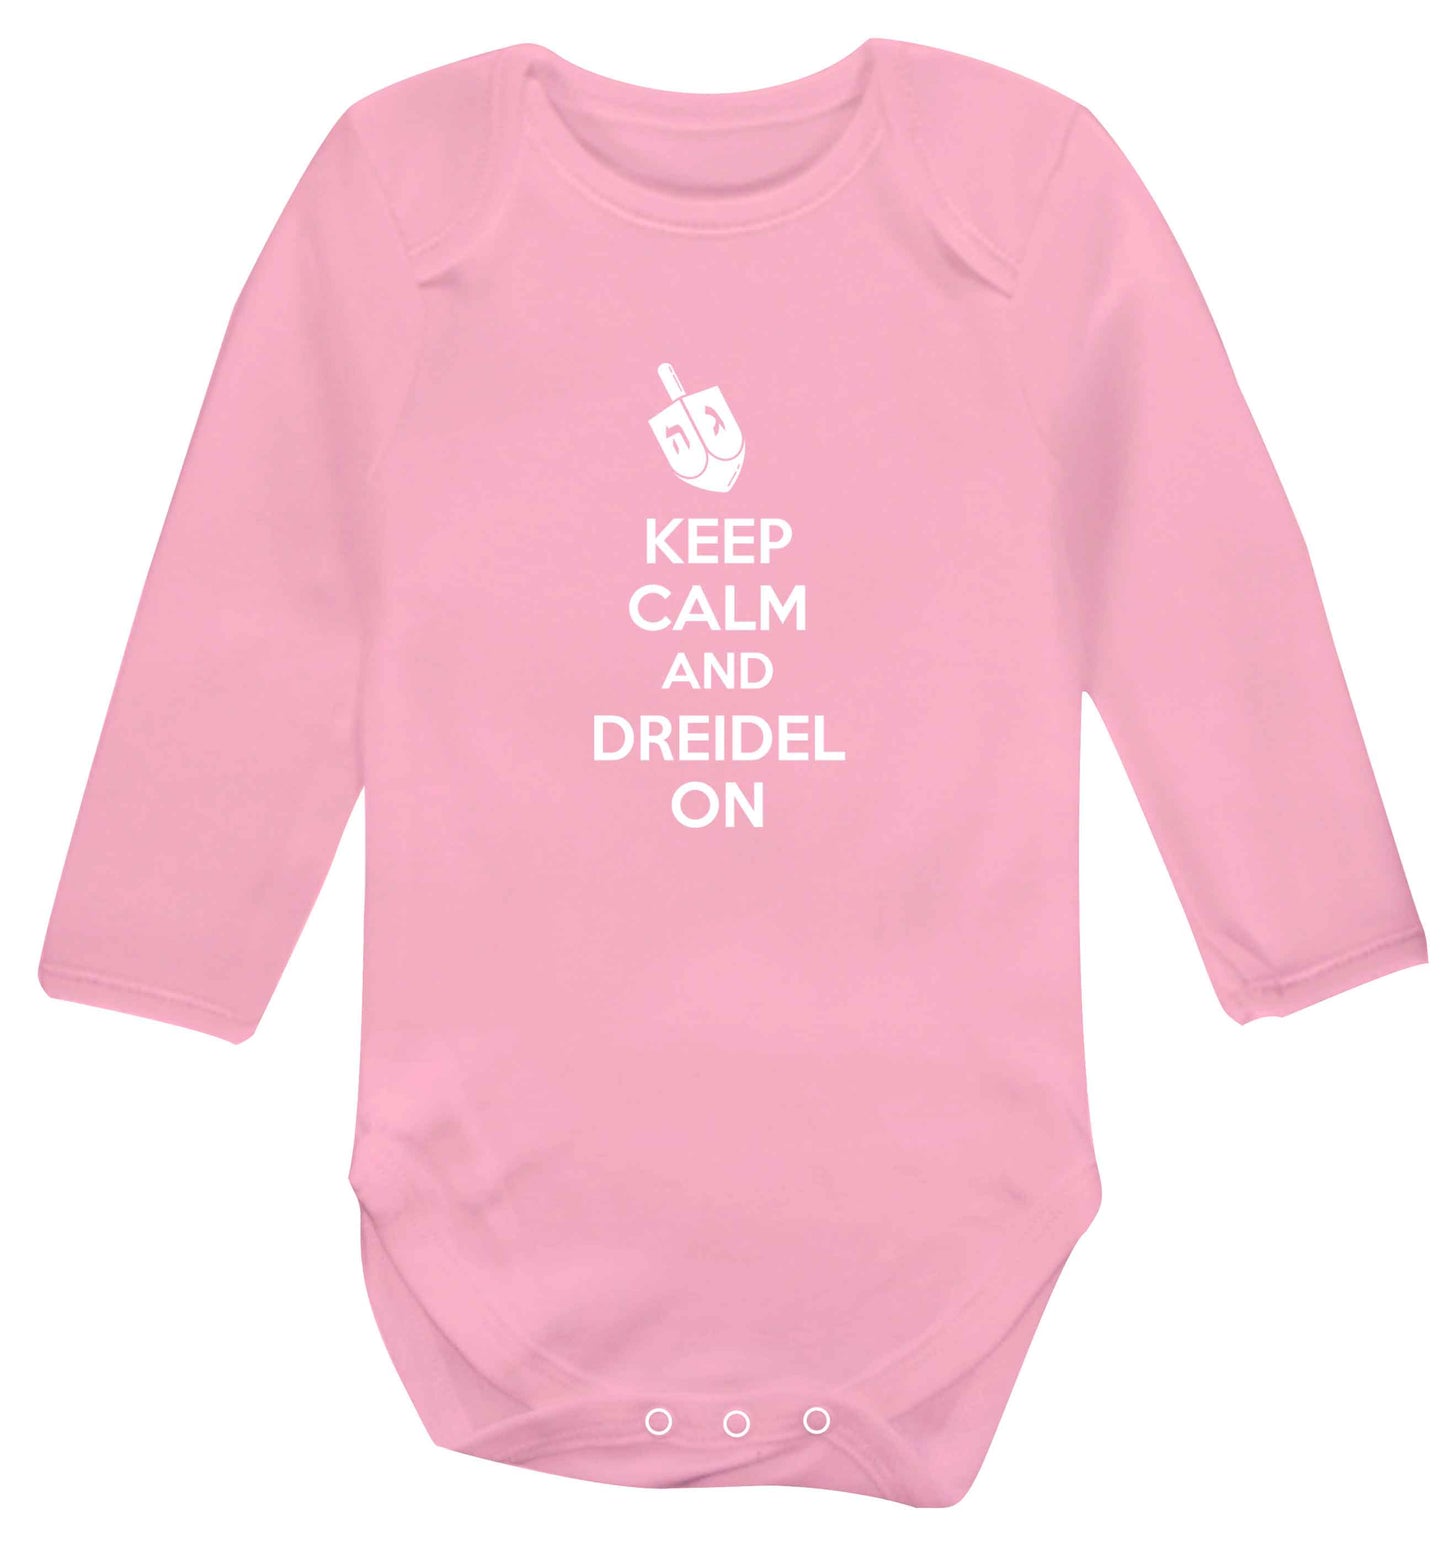 Keep calm and dreidel on baby vest long sleeved pale pink 6-12 months